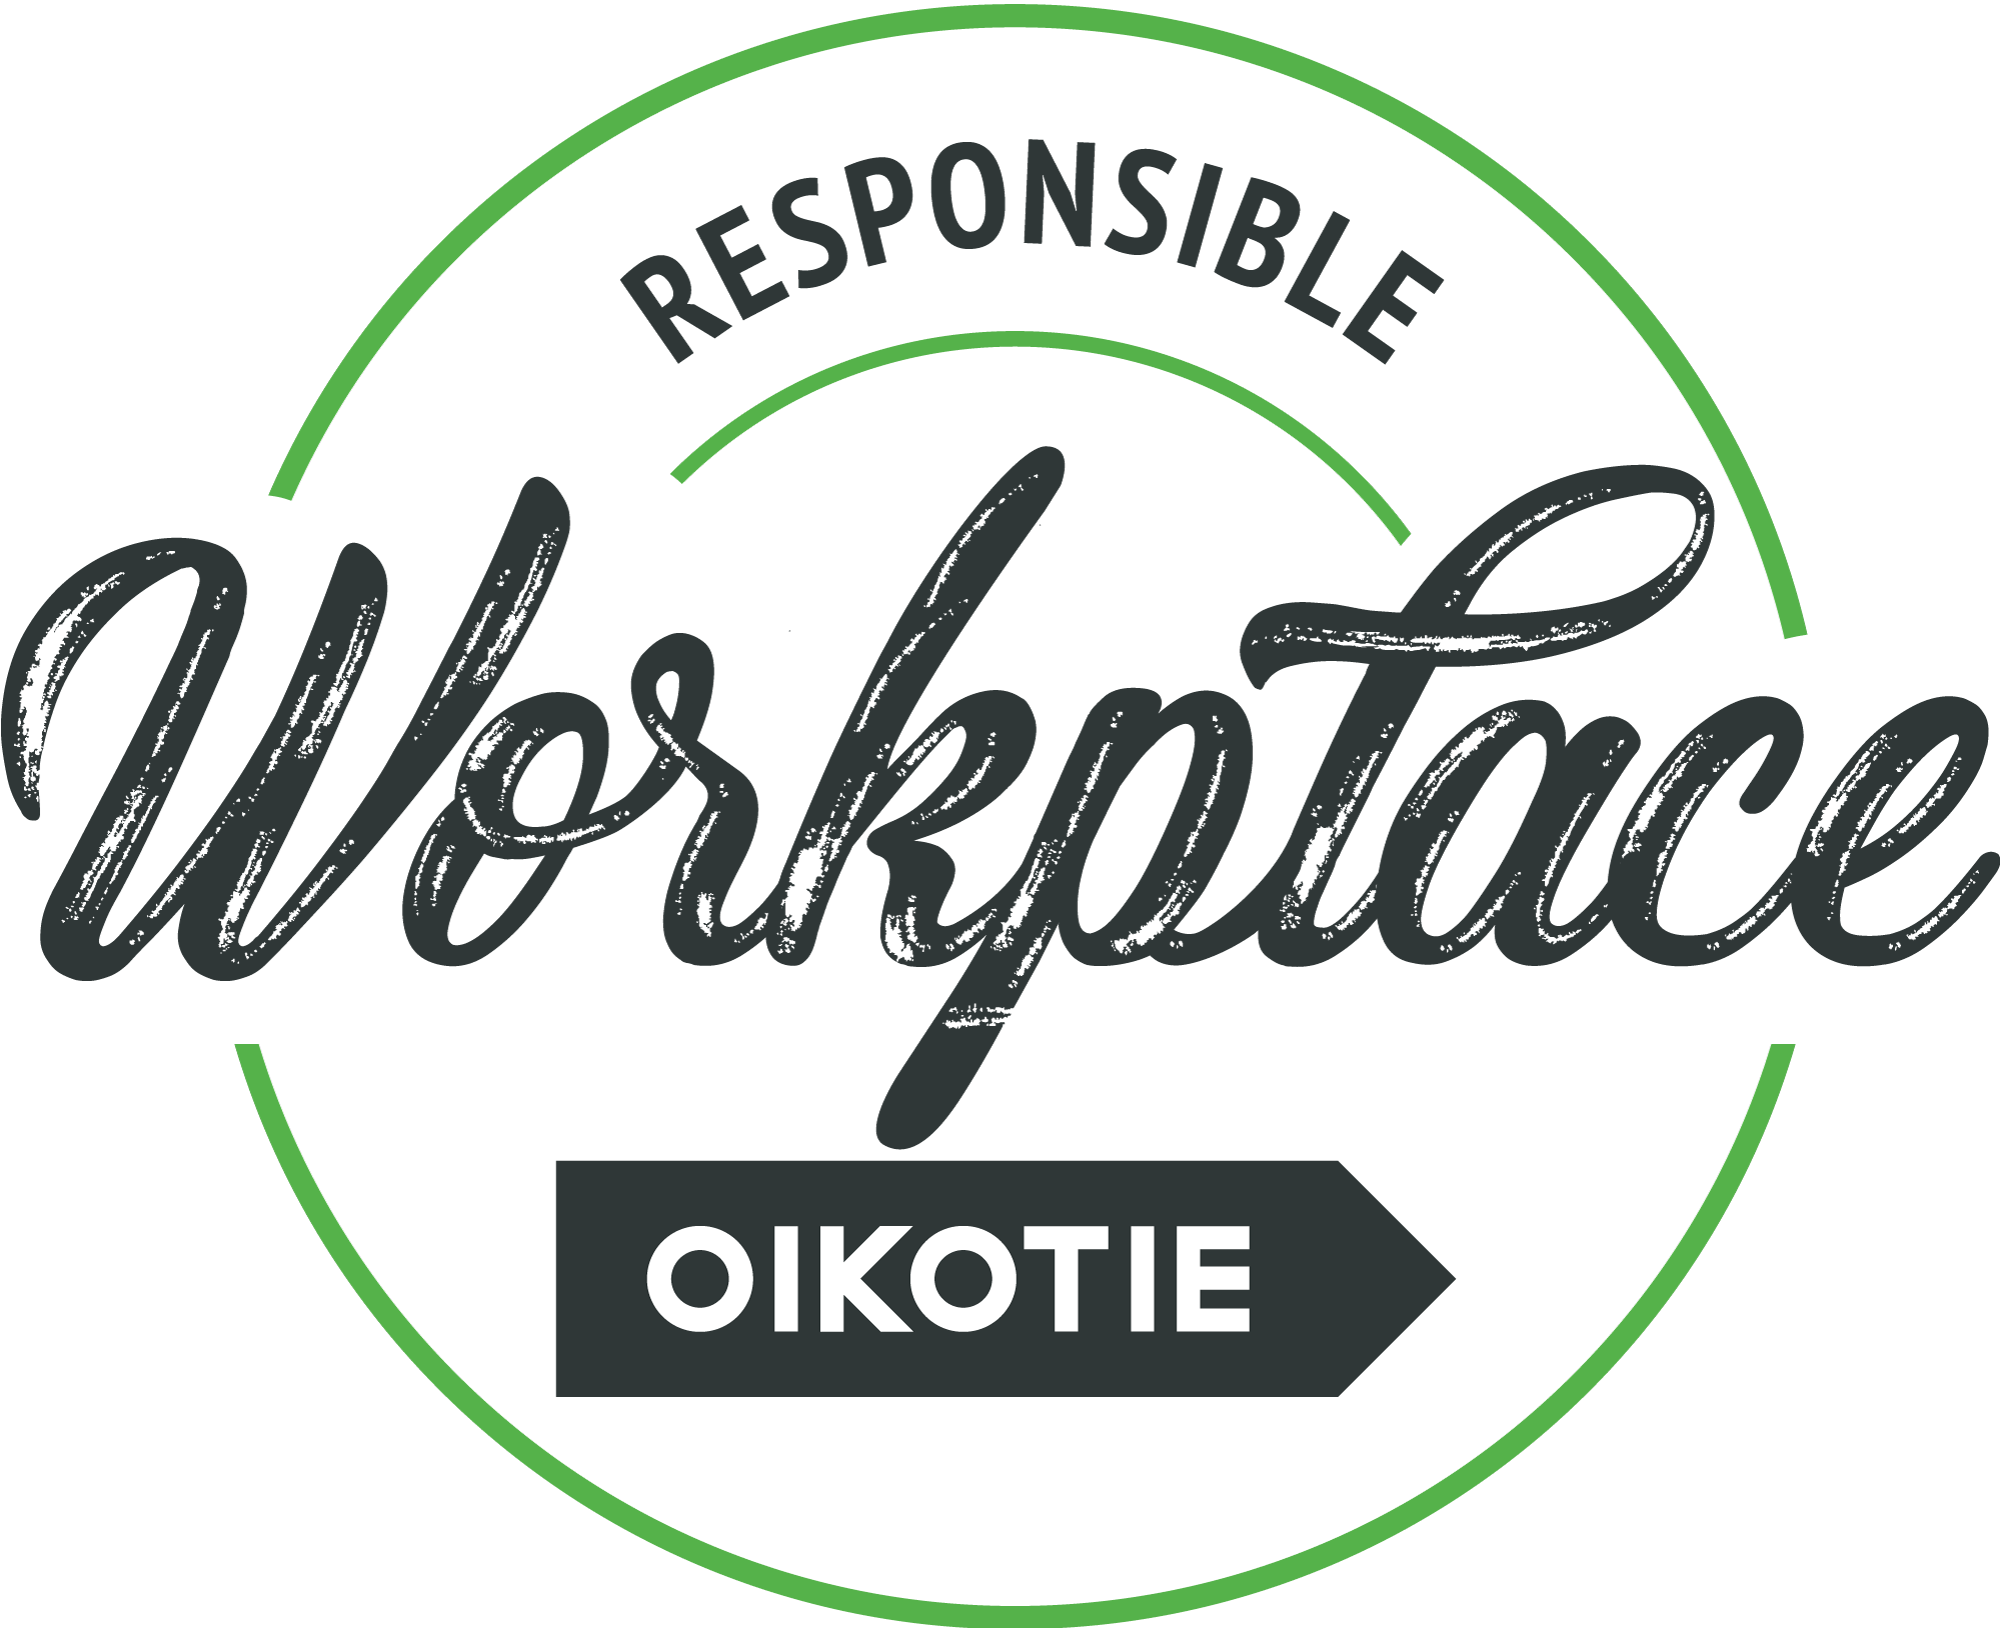 Responsible workplace logo